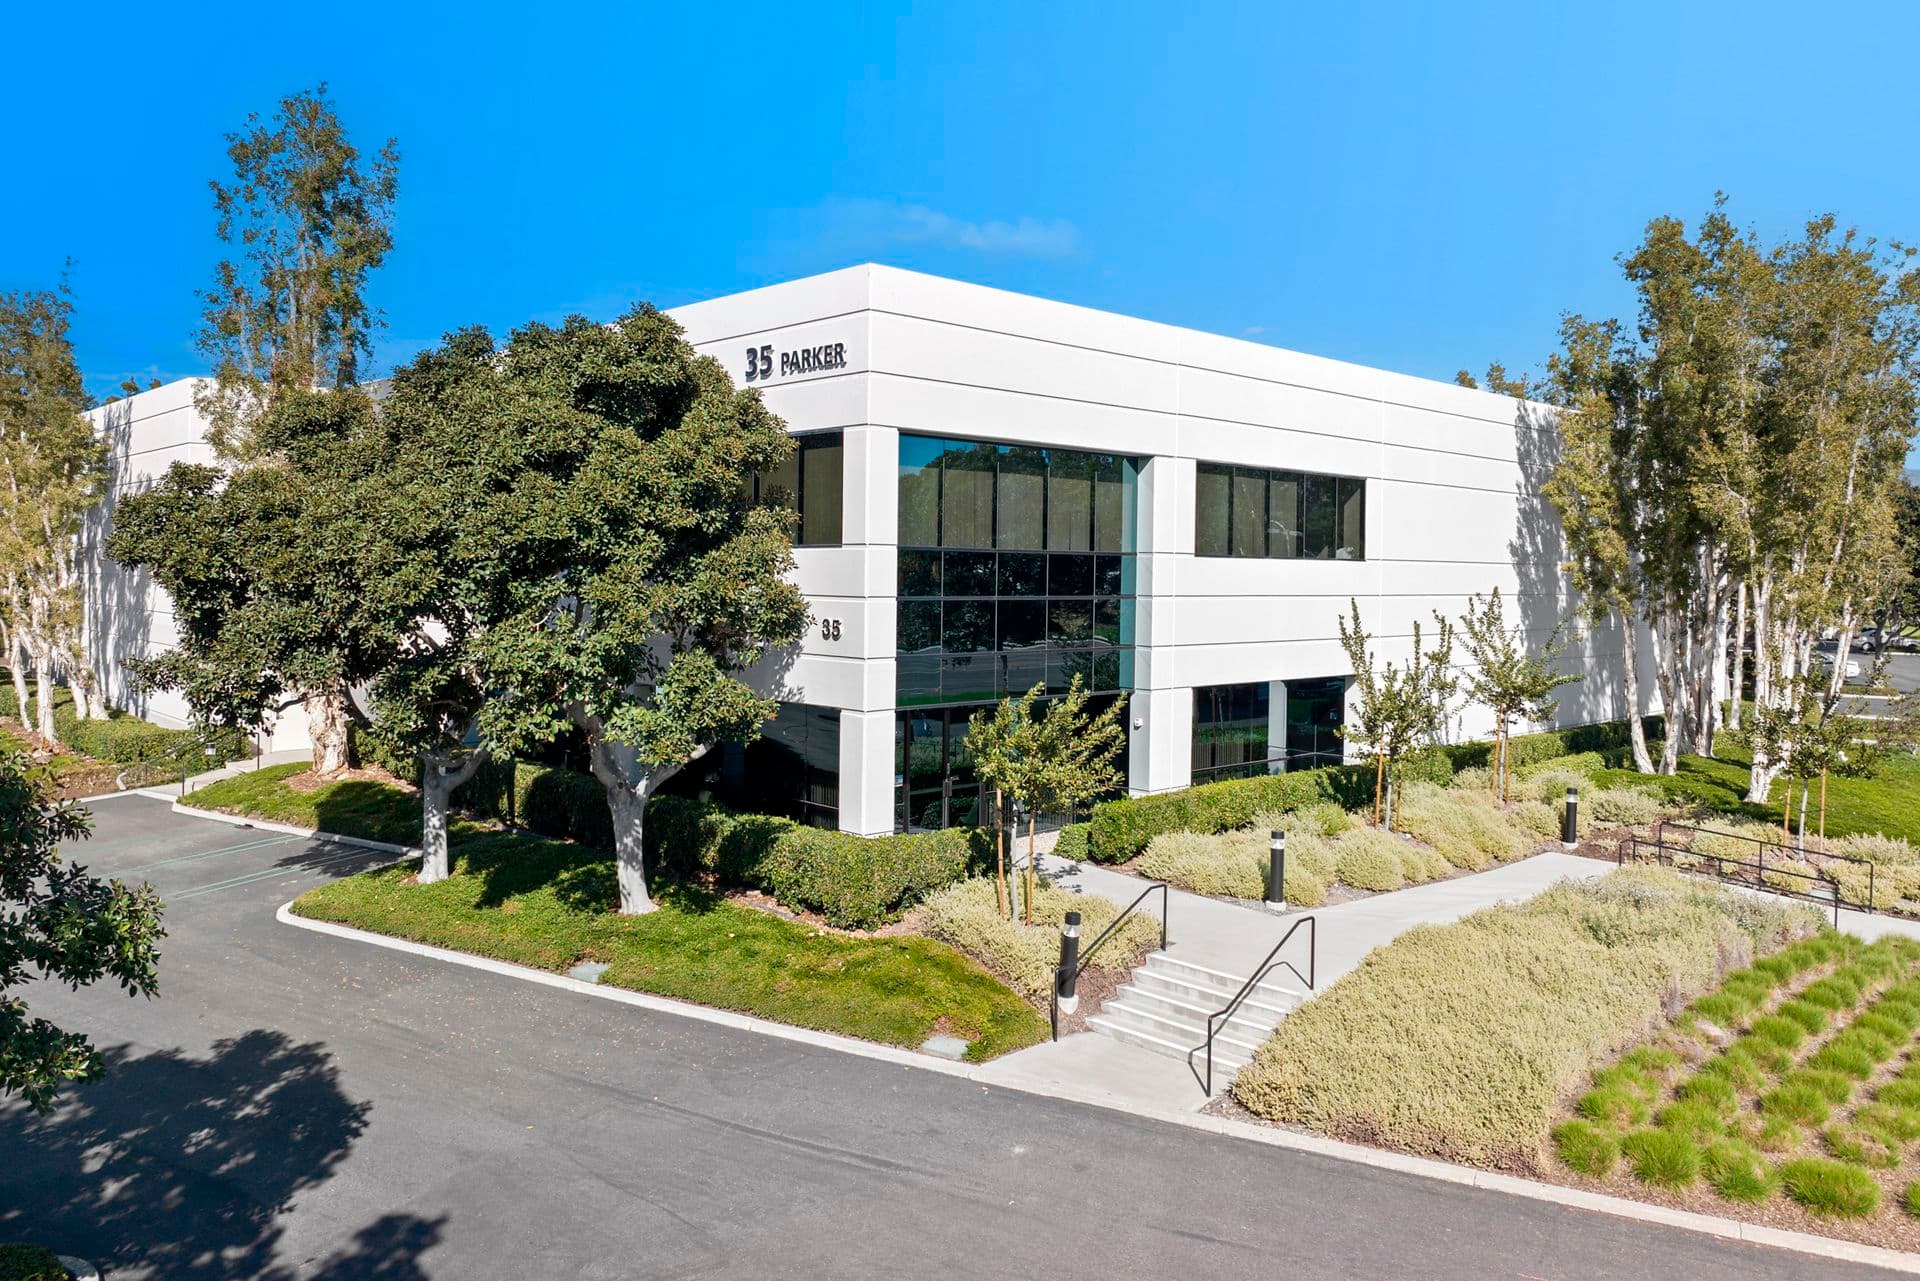 Exterior aerial hero photography of 35 Parker at Parker Technology Center in Irvine, CA.